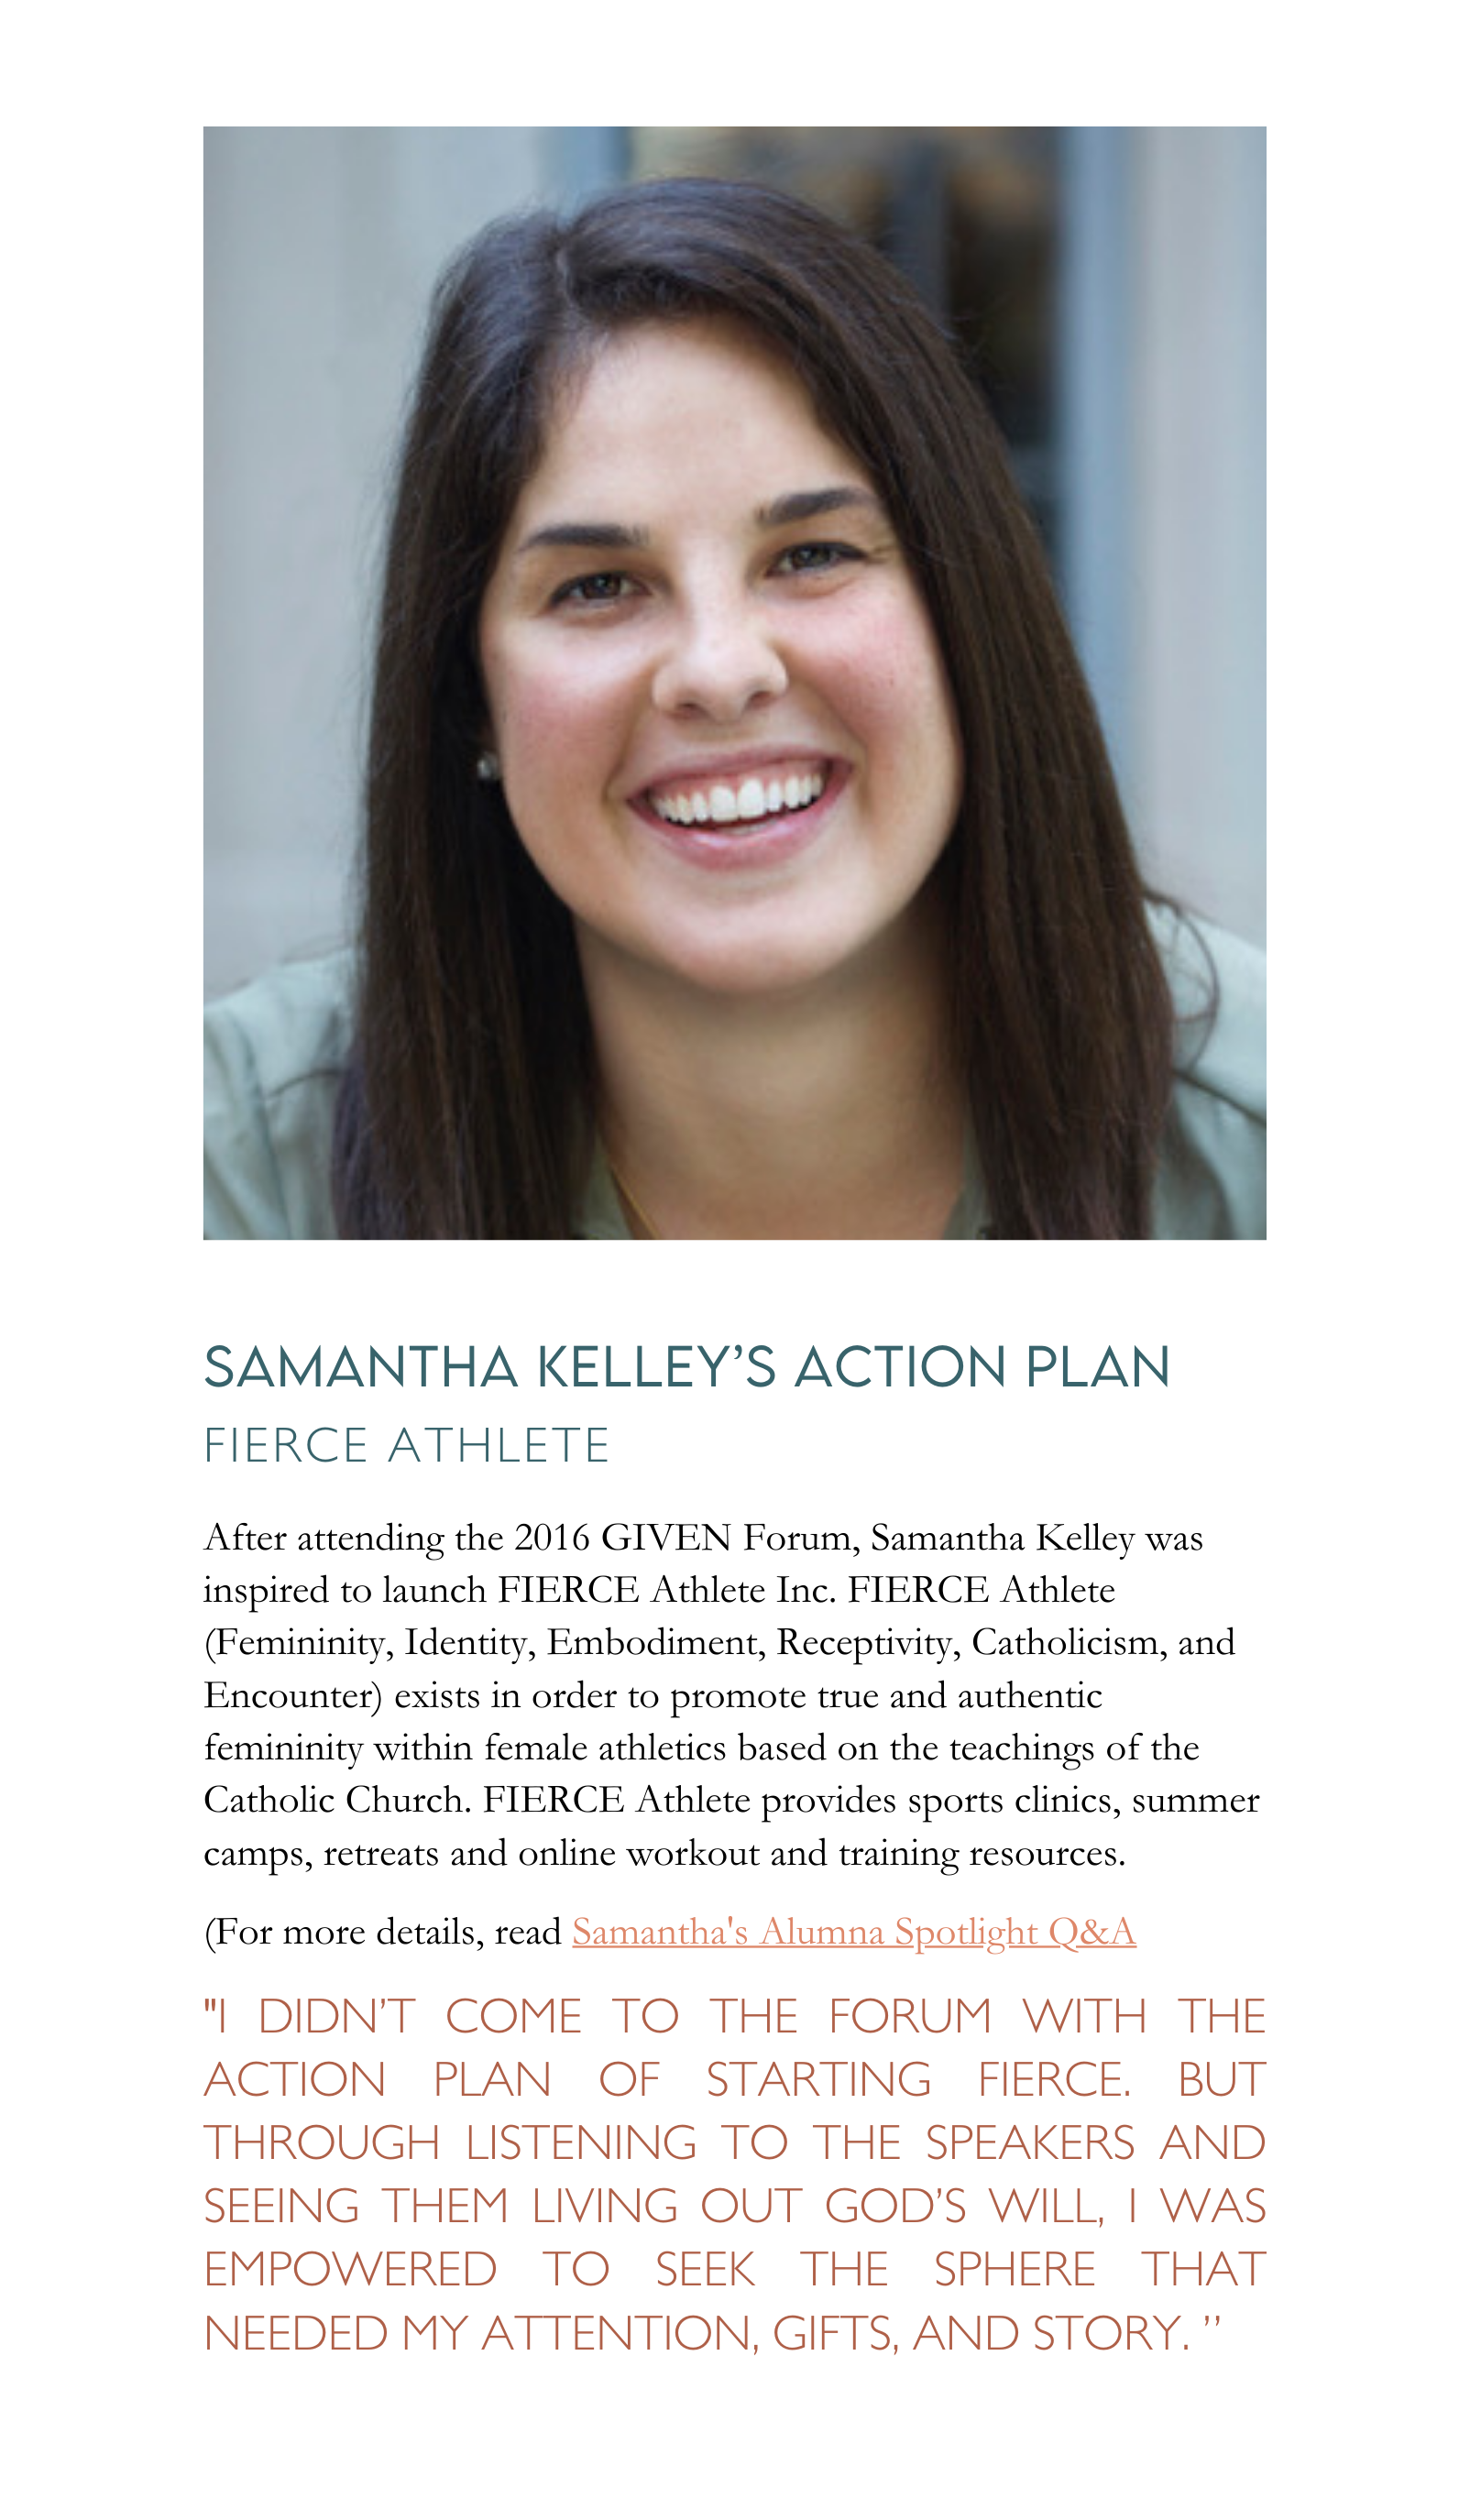 After attending the 2016 GIVEN Forum, Samantha Kelley was inspired to launch FIERCE Athlete Inc. FIERCE Athlete (Femininity, Identity, Embodiment, Receptivity, Catholicism, and Encounter) exists in order to promote true and authentic femininity within female athletics based on the teachings of the Catholic Church. FIERCE Athlete provides sports clinics, summer camps, retreats and online workout and training resources.